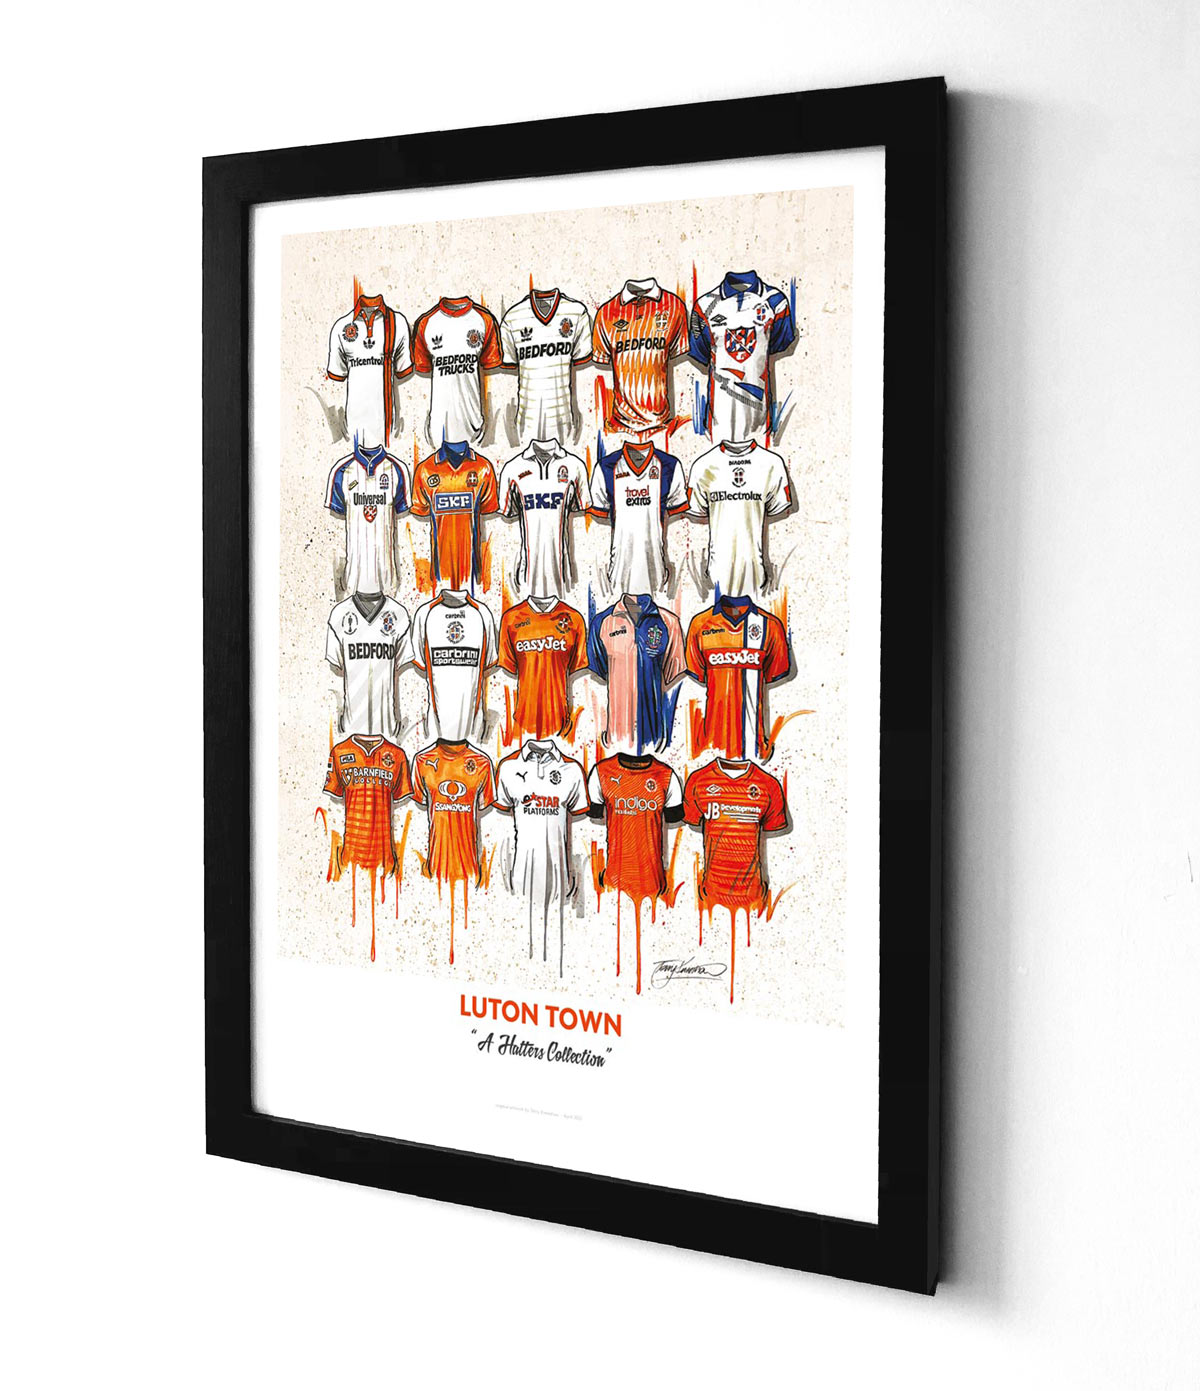 featuring 20 iconic jerseys from the team. The jerseys are arranged in a grid pattern, with the Luton FC crest at the centre. The jerseys feature different designs and colours, representing different eras of the team's history. The print is A2 size and is a limited edition print.